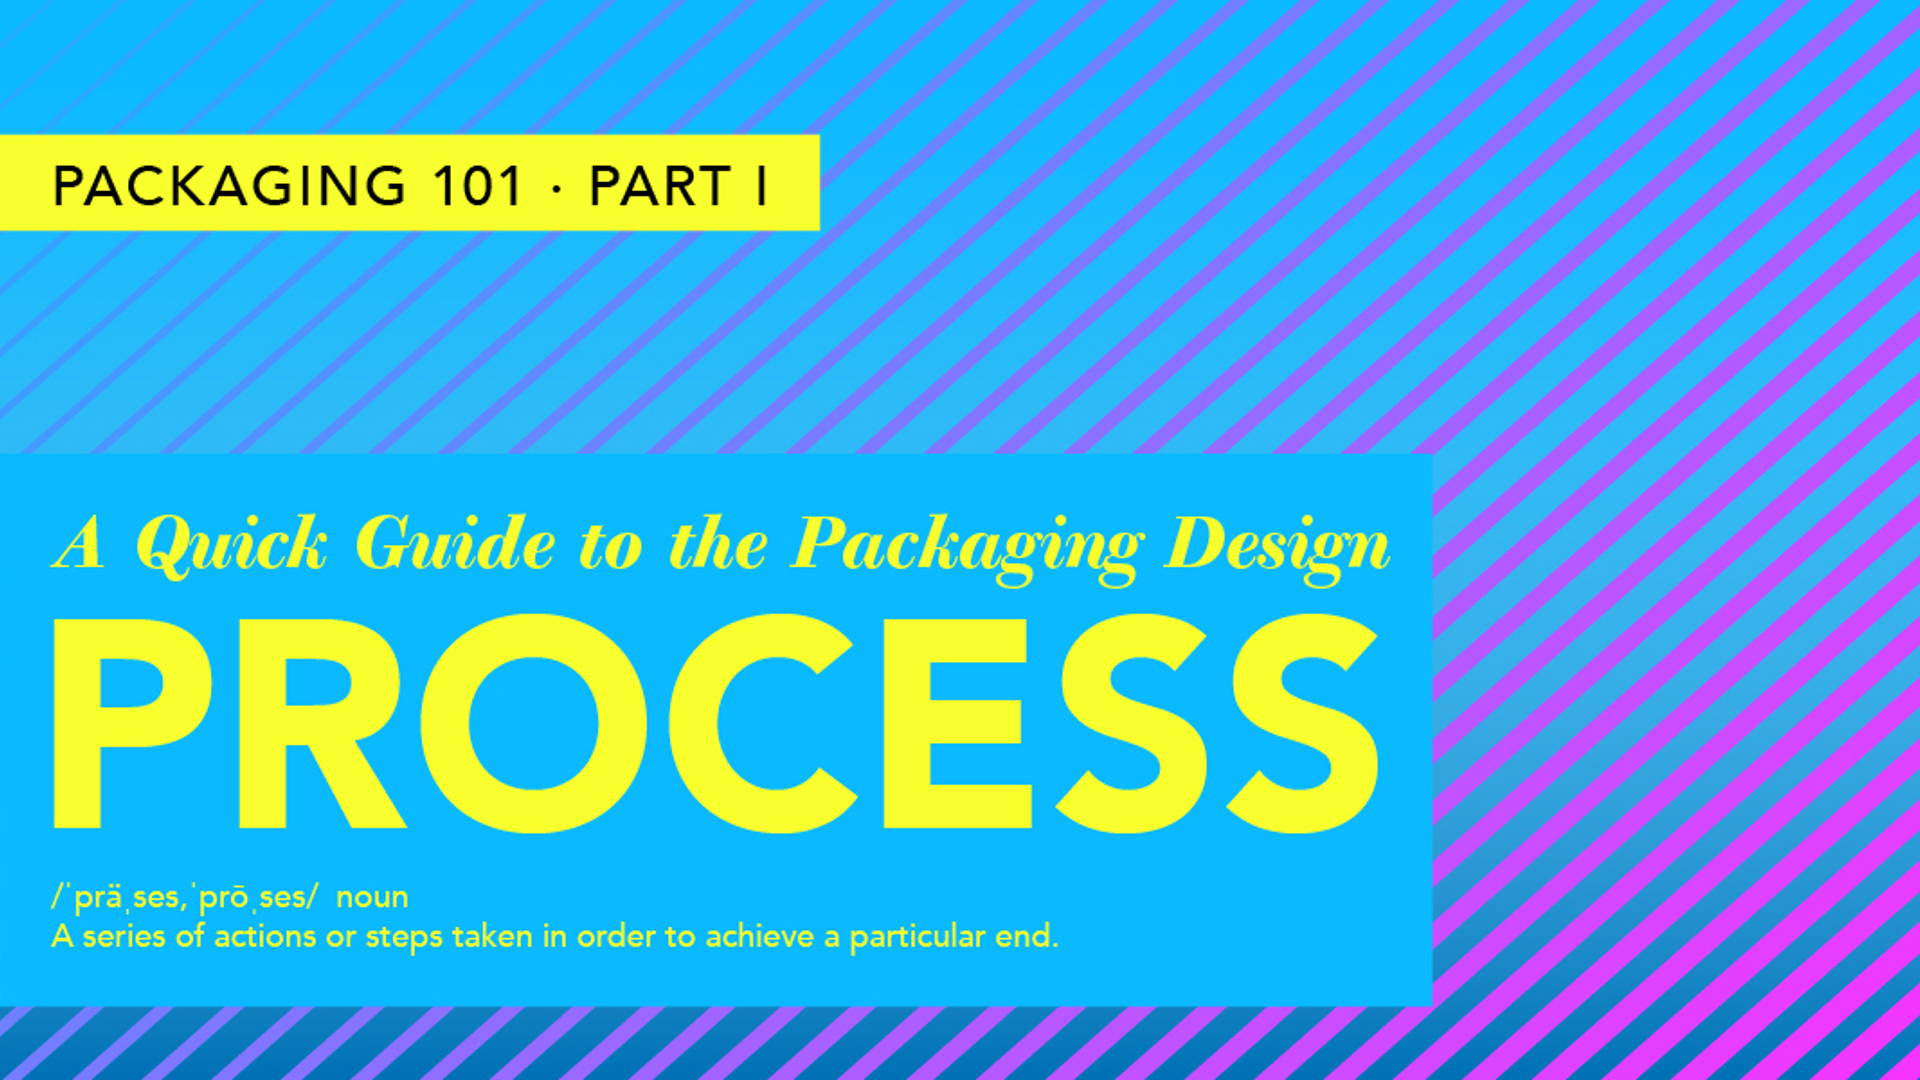 Featured image for Packaging 101 - Part I